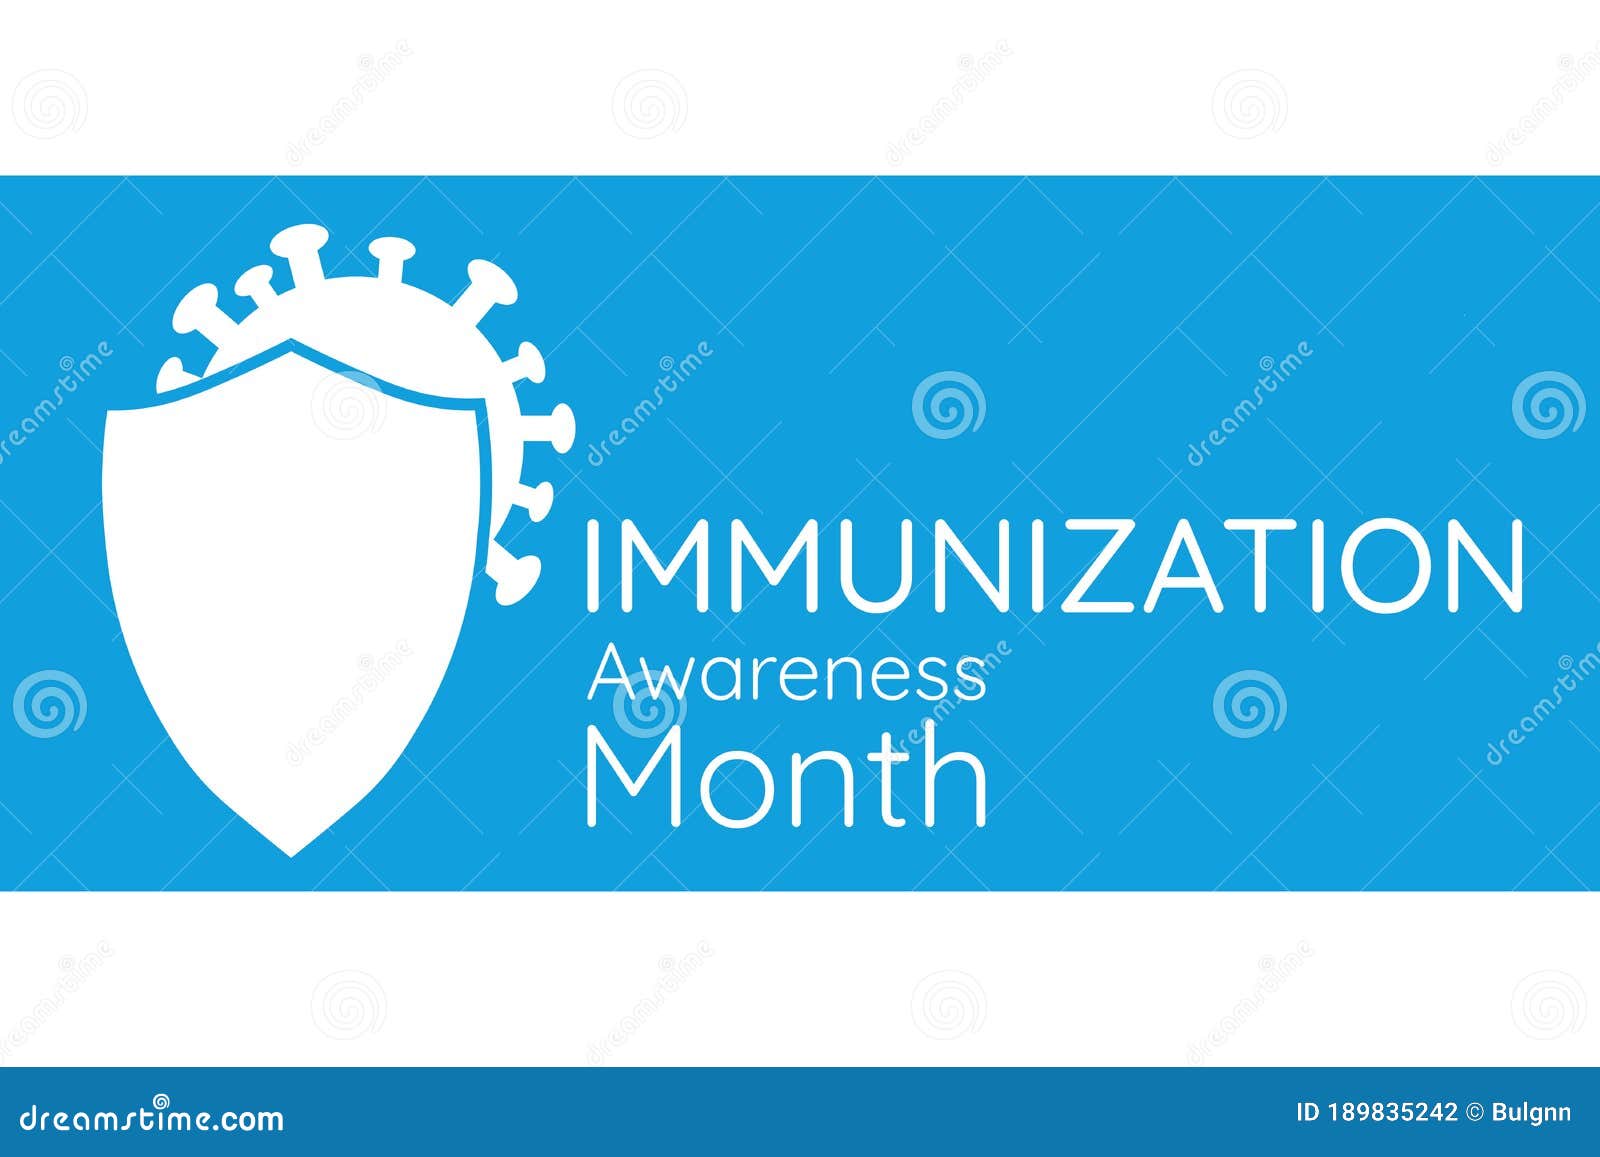 august is national immunization awareness month. holiday concept. template for background, banner, card, poster with